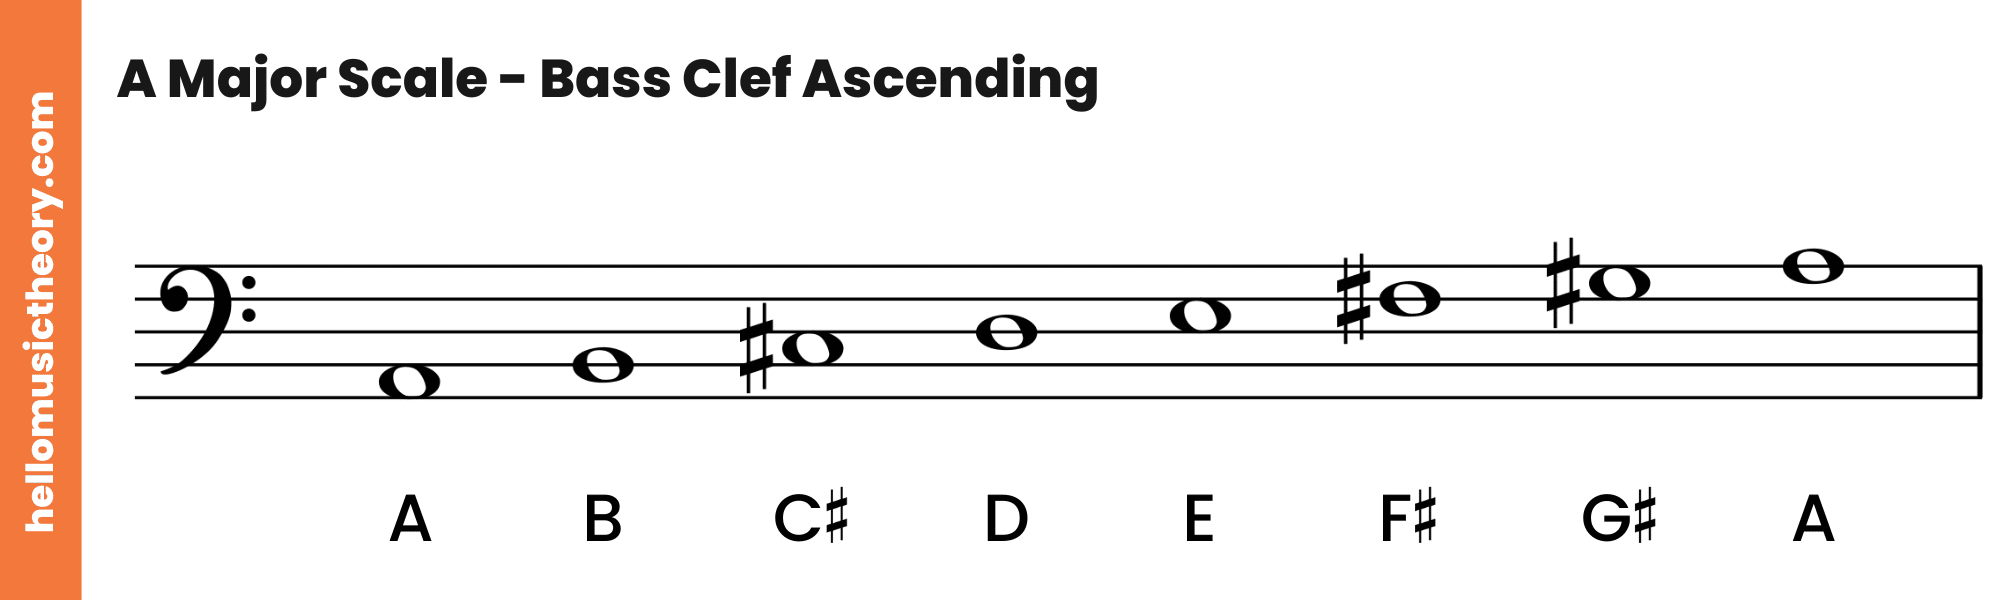 A Major Scale Bass Clef Ascending